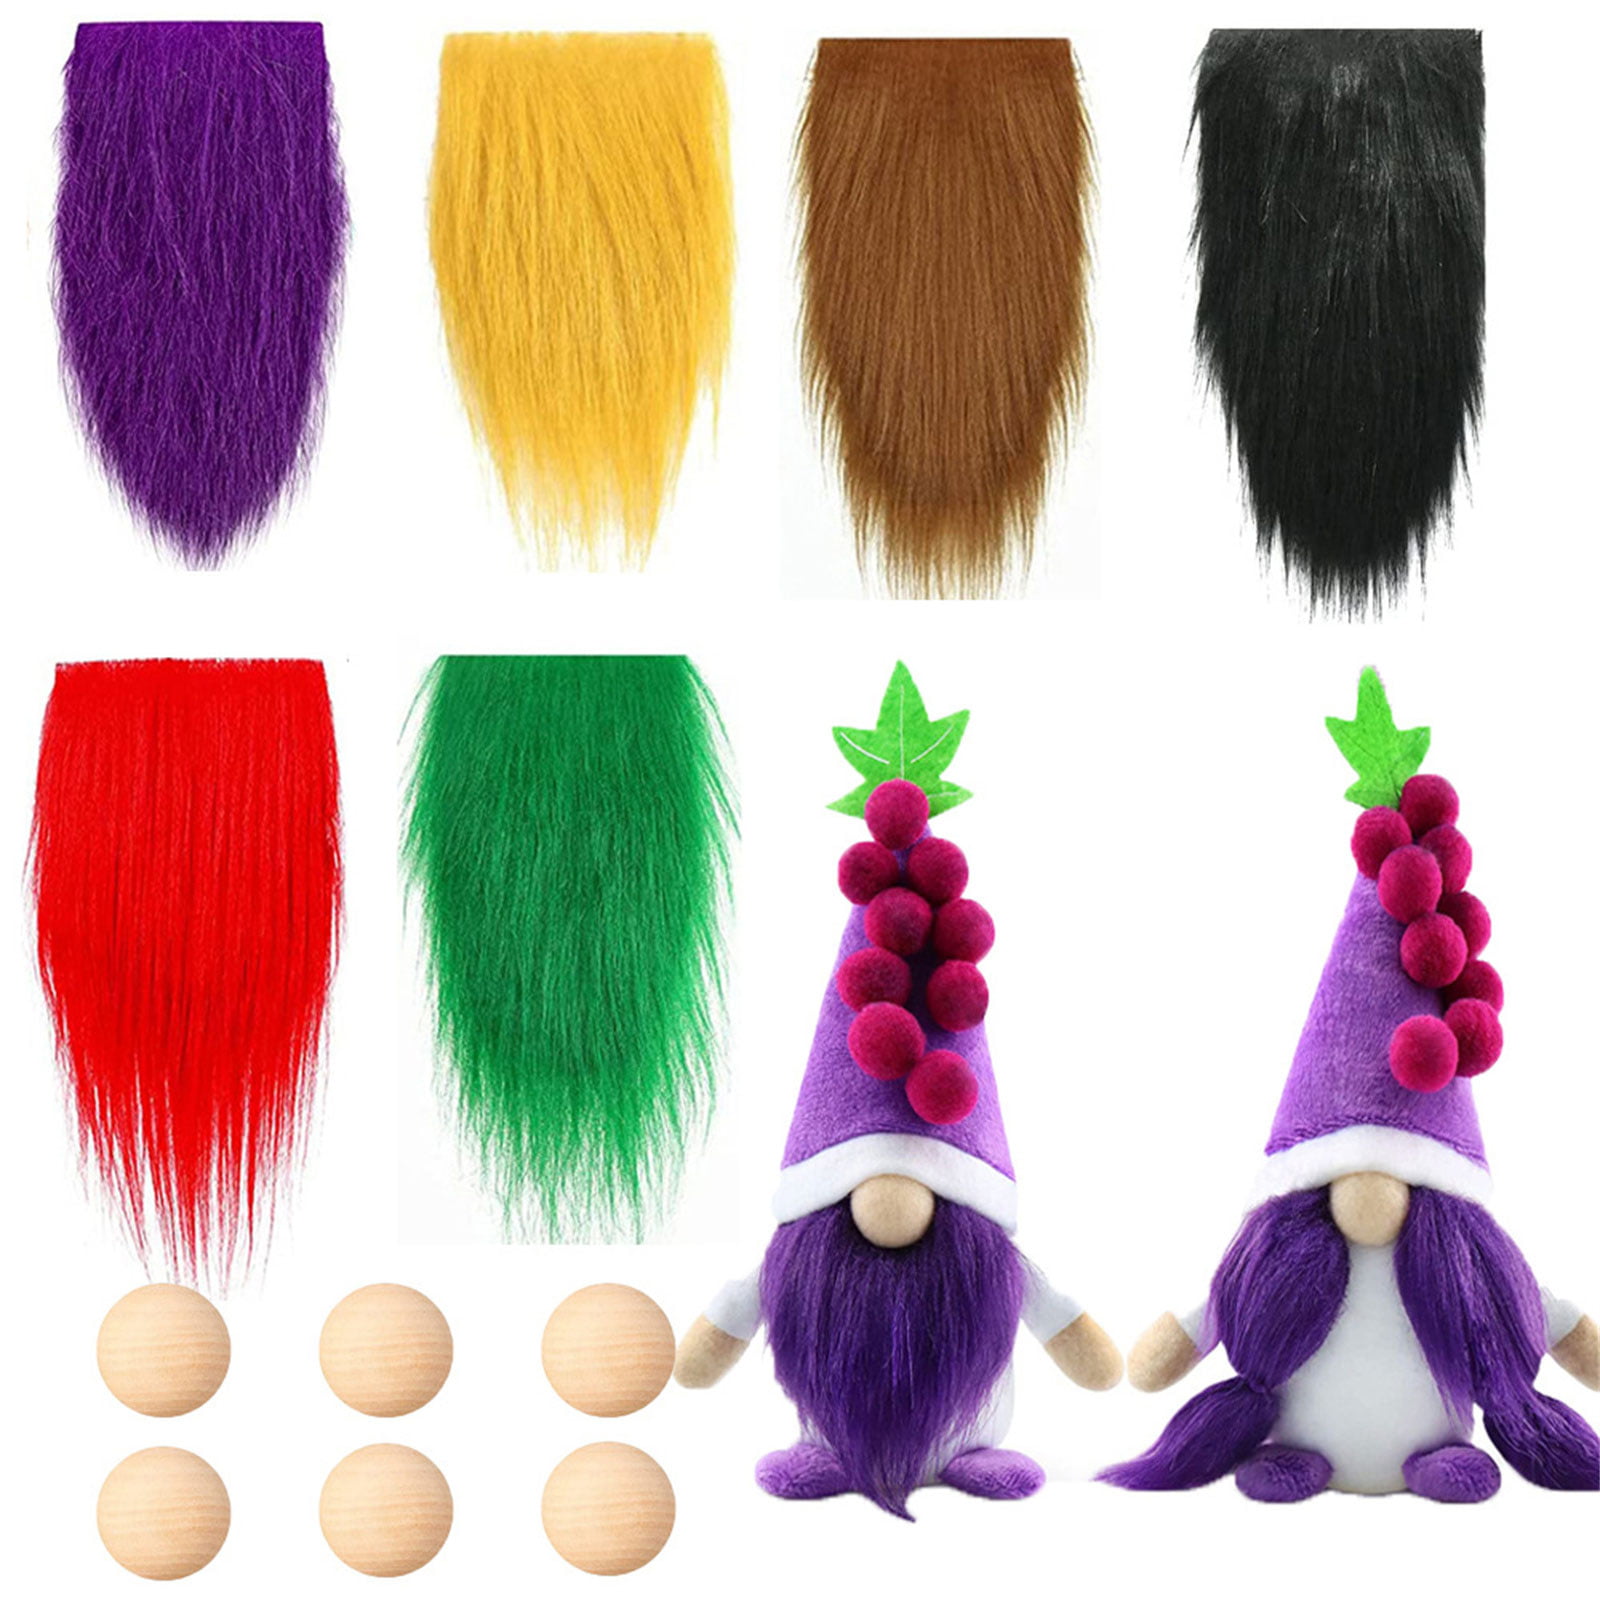  15 Pcs Gnome Beards for Crafting Easter Day Faux Fur Fabric  Precut Gnomes Beards Handmade 30 Pieces Wood Balls for Halloween Christmas  Valentine's Day Independence Day (Gray, Camel, White) : Arts